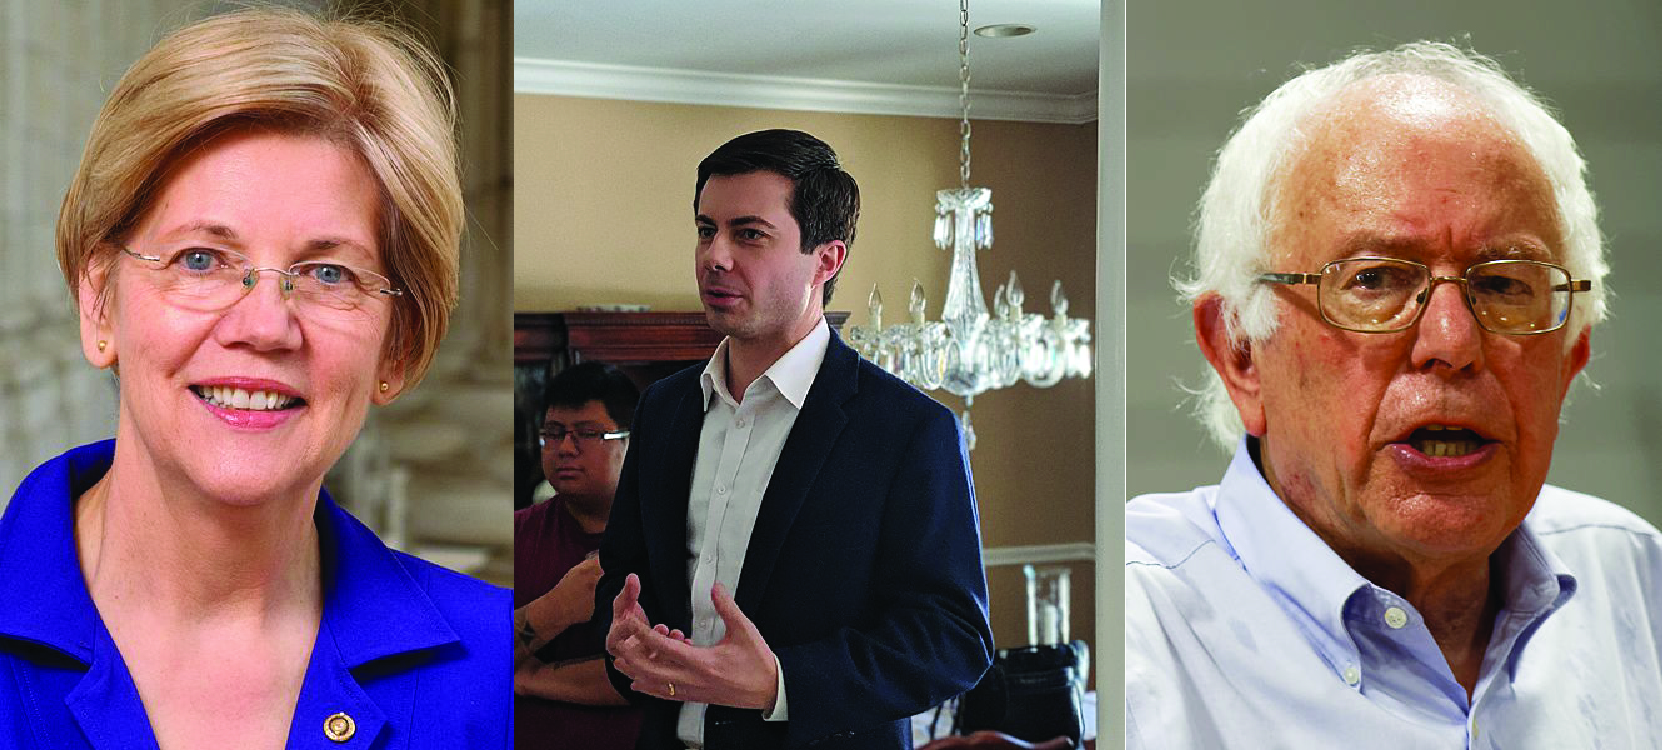 Candidates Sen. Elizabeth Warren, Mayor Pete Buttigieg and Sen. Bernie Sanders are some of the top candidates running for the Democratic nomination. Other candidates may not have the same chance as others. | Photos courtesy of Wikimedia Commons/users: Stemoc, SecretName101 and William S. Saturn